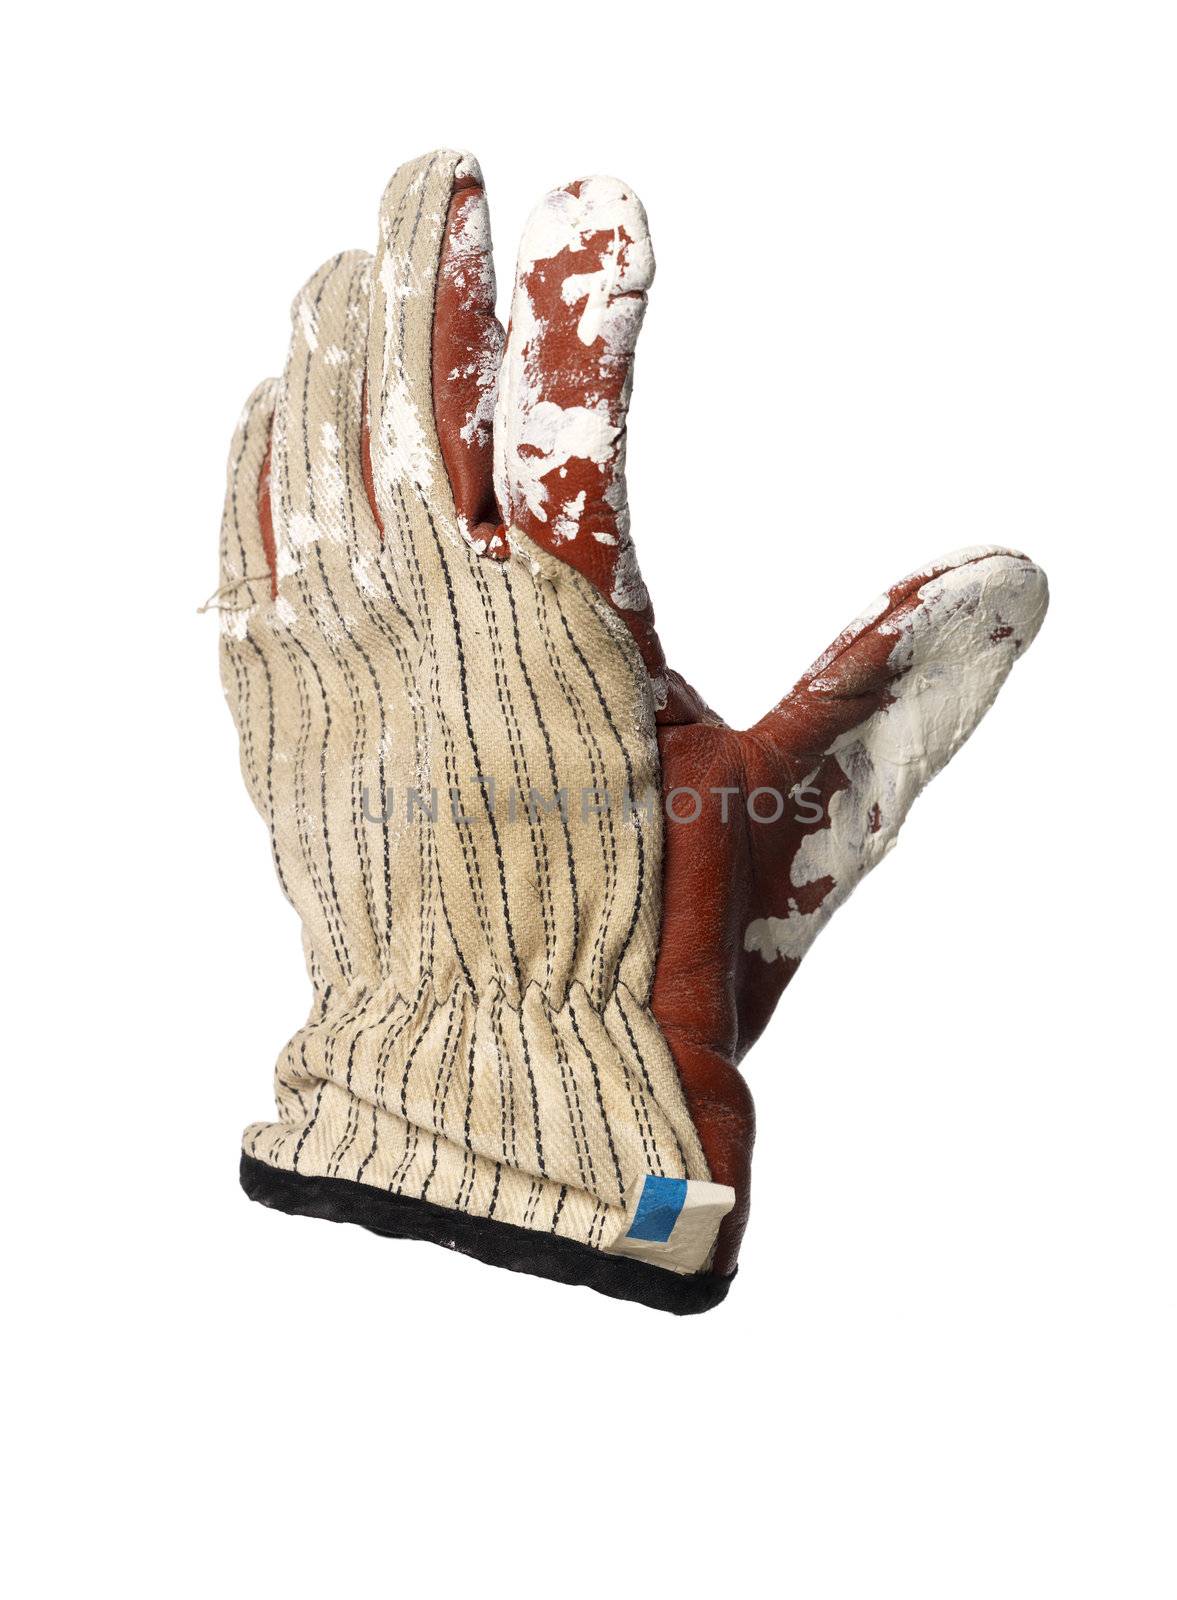 Dirty protection glove